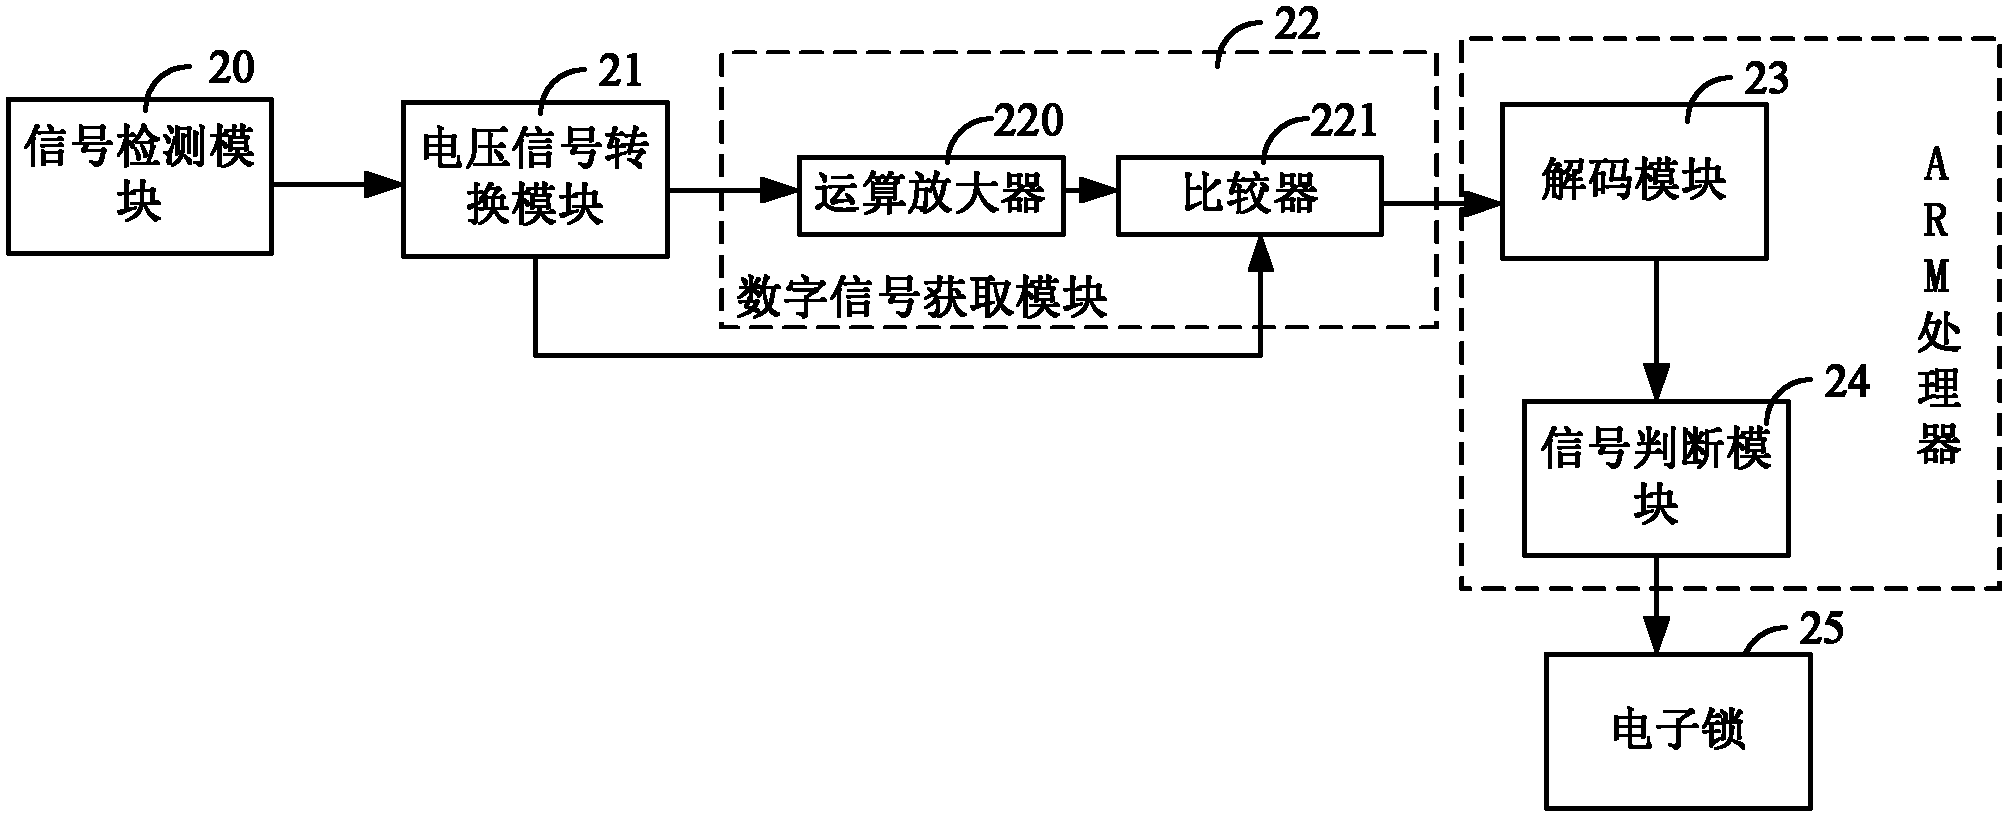 Visible light communication method and data storage system based on visible light communication